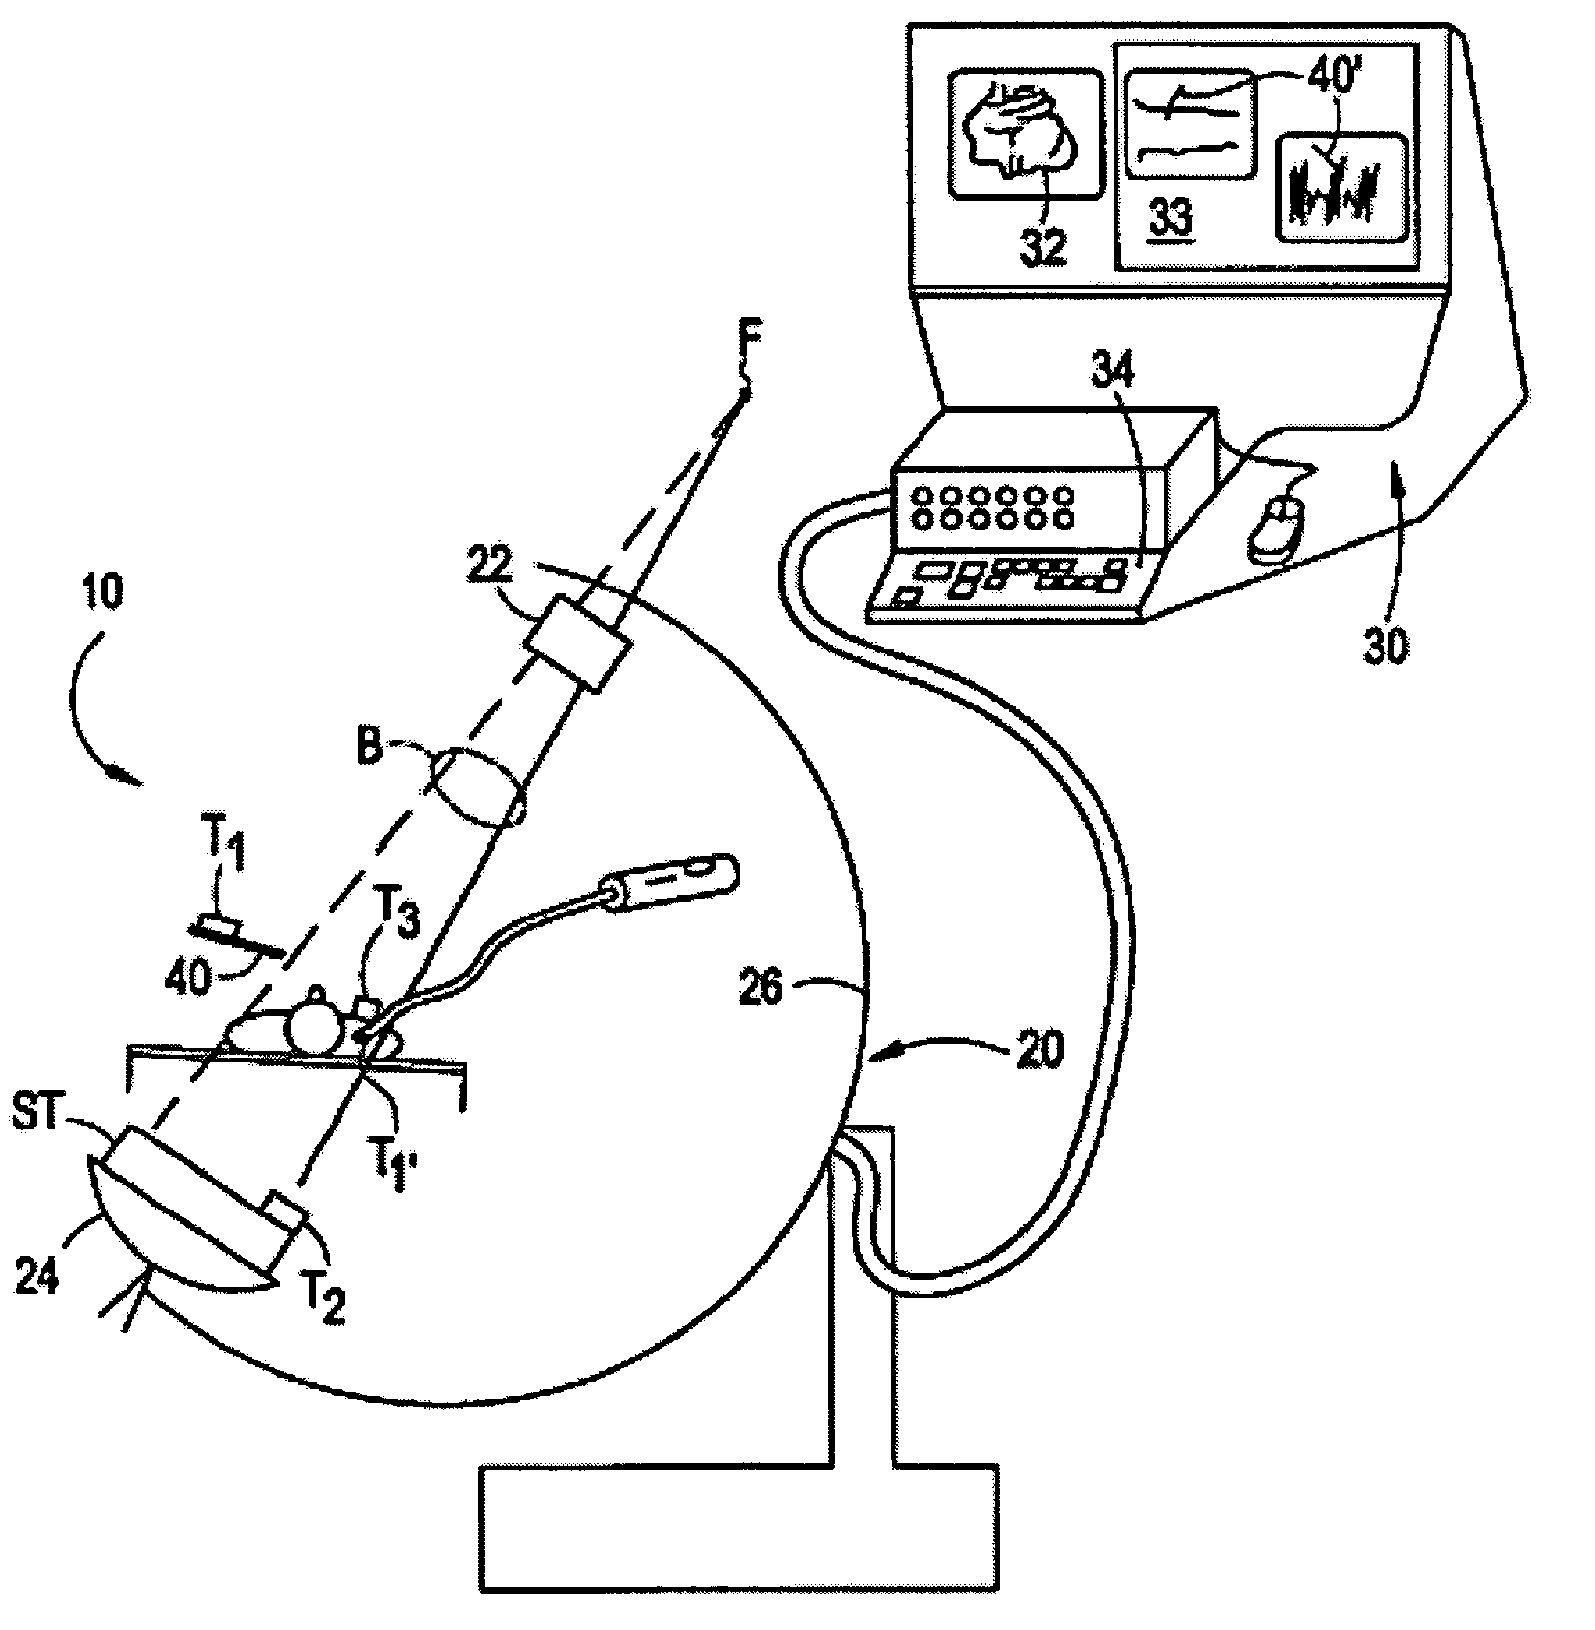 Method and system for improved correction of registration error in a fluoroscopic image